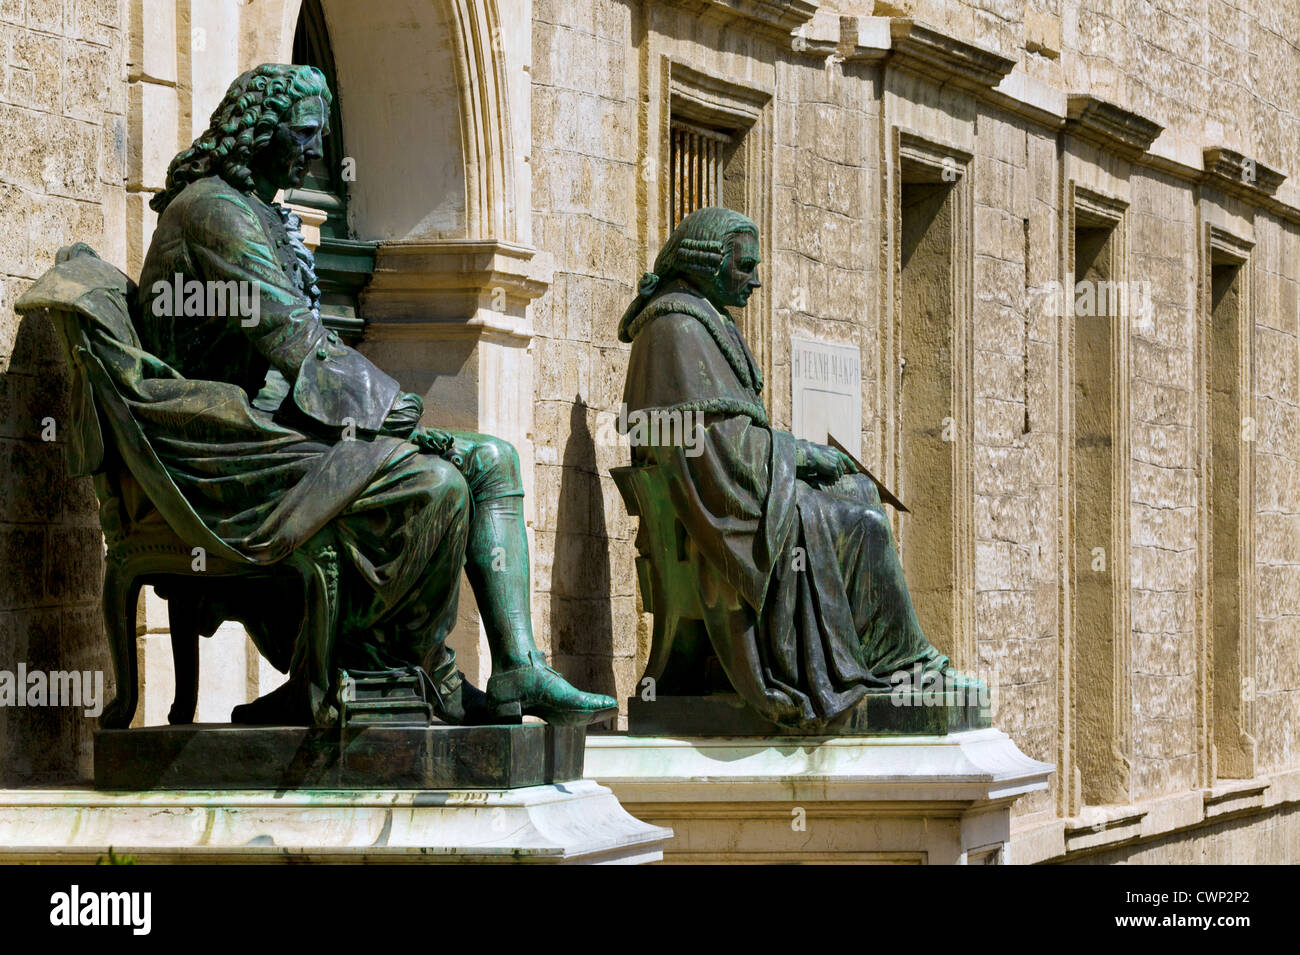 University Of Medicine,Statues Of Lapeyronie And Barthes, Montpellier, Languedoc-Roussillon, France Stock Photo